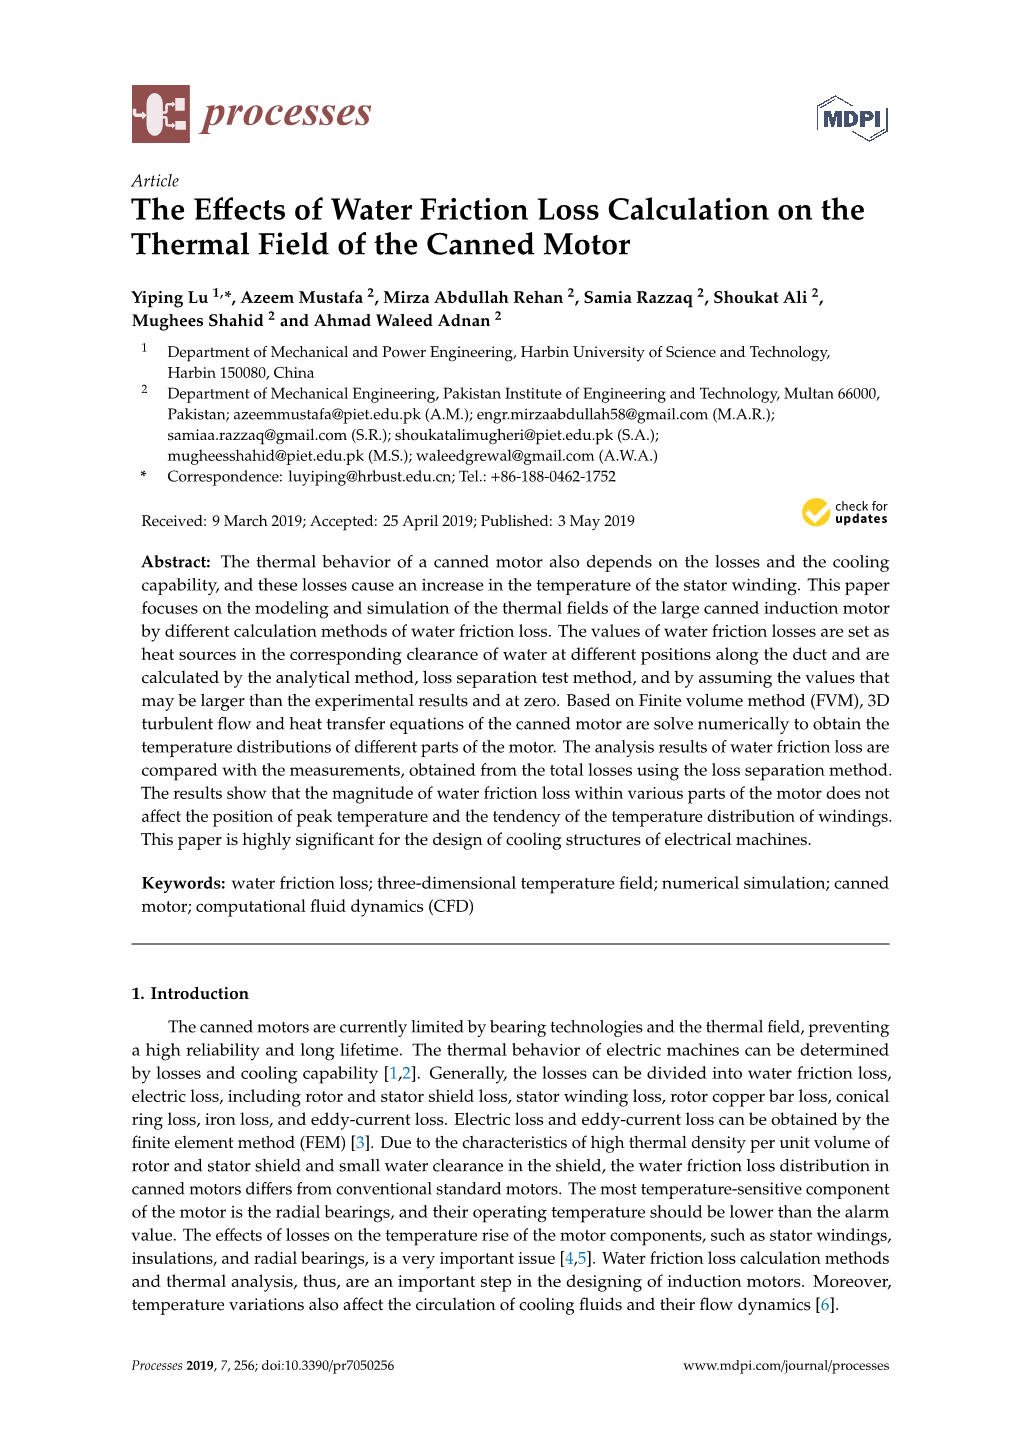 The Effects of Water Friction Loss Calculation on the Thermal Field Of